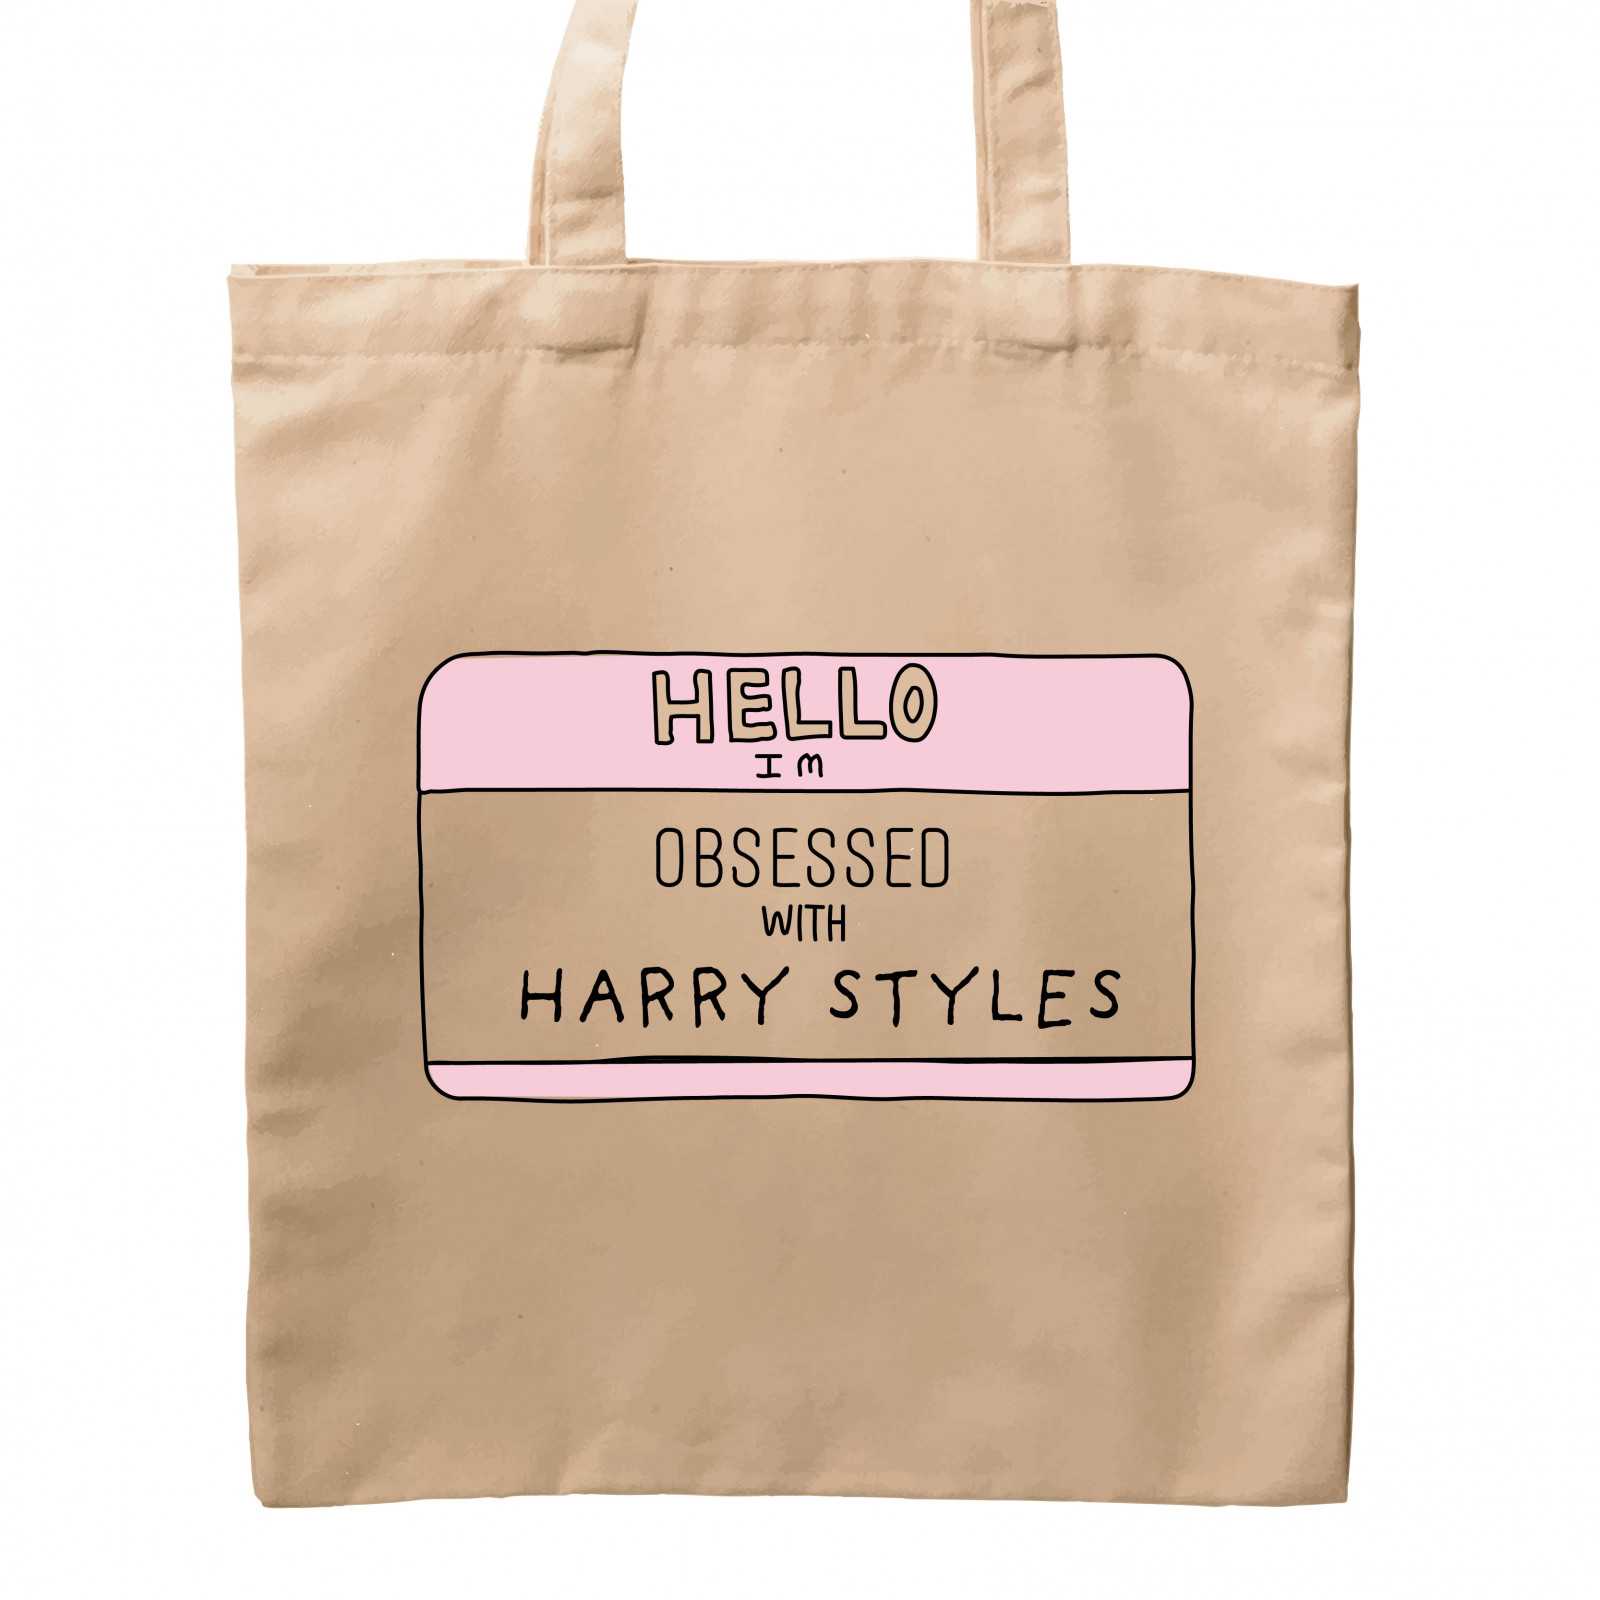 Torba Harry Styles (Hello I'm obsessed with) - mitzu.pl